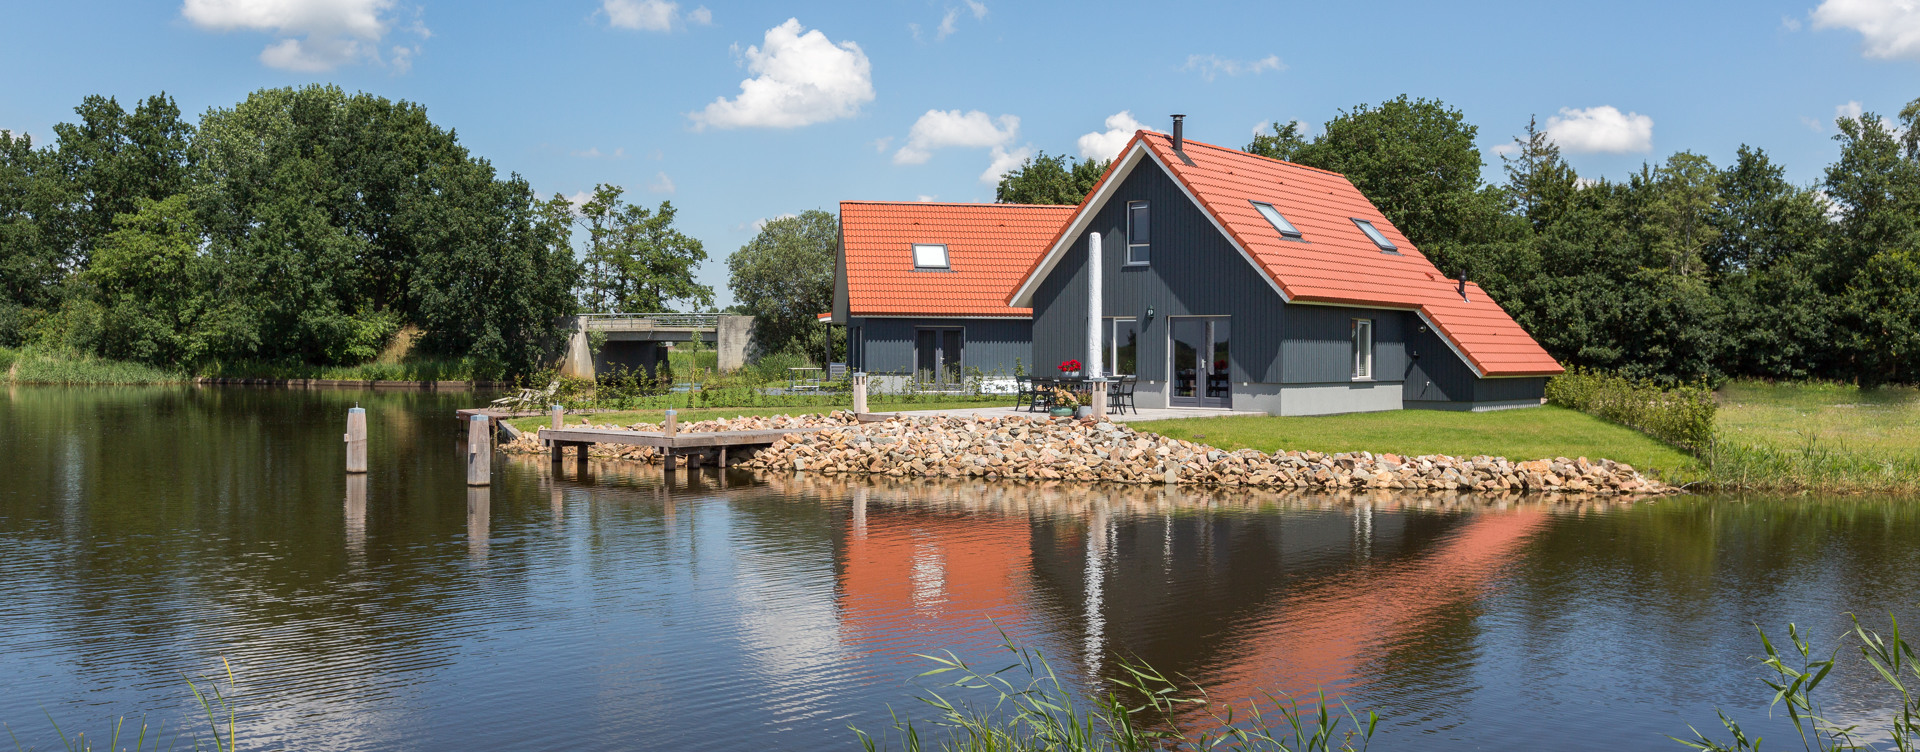 Experience a relaxing stay on the water in Friesland